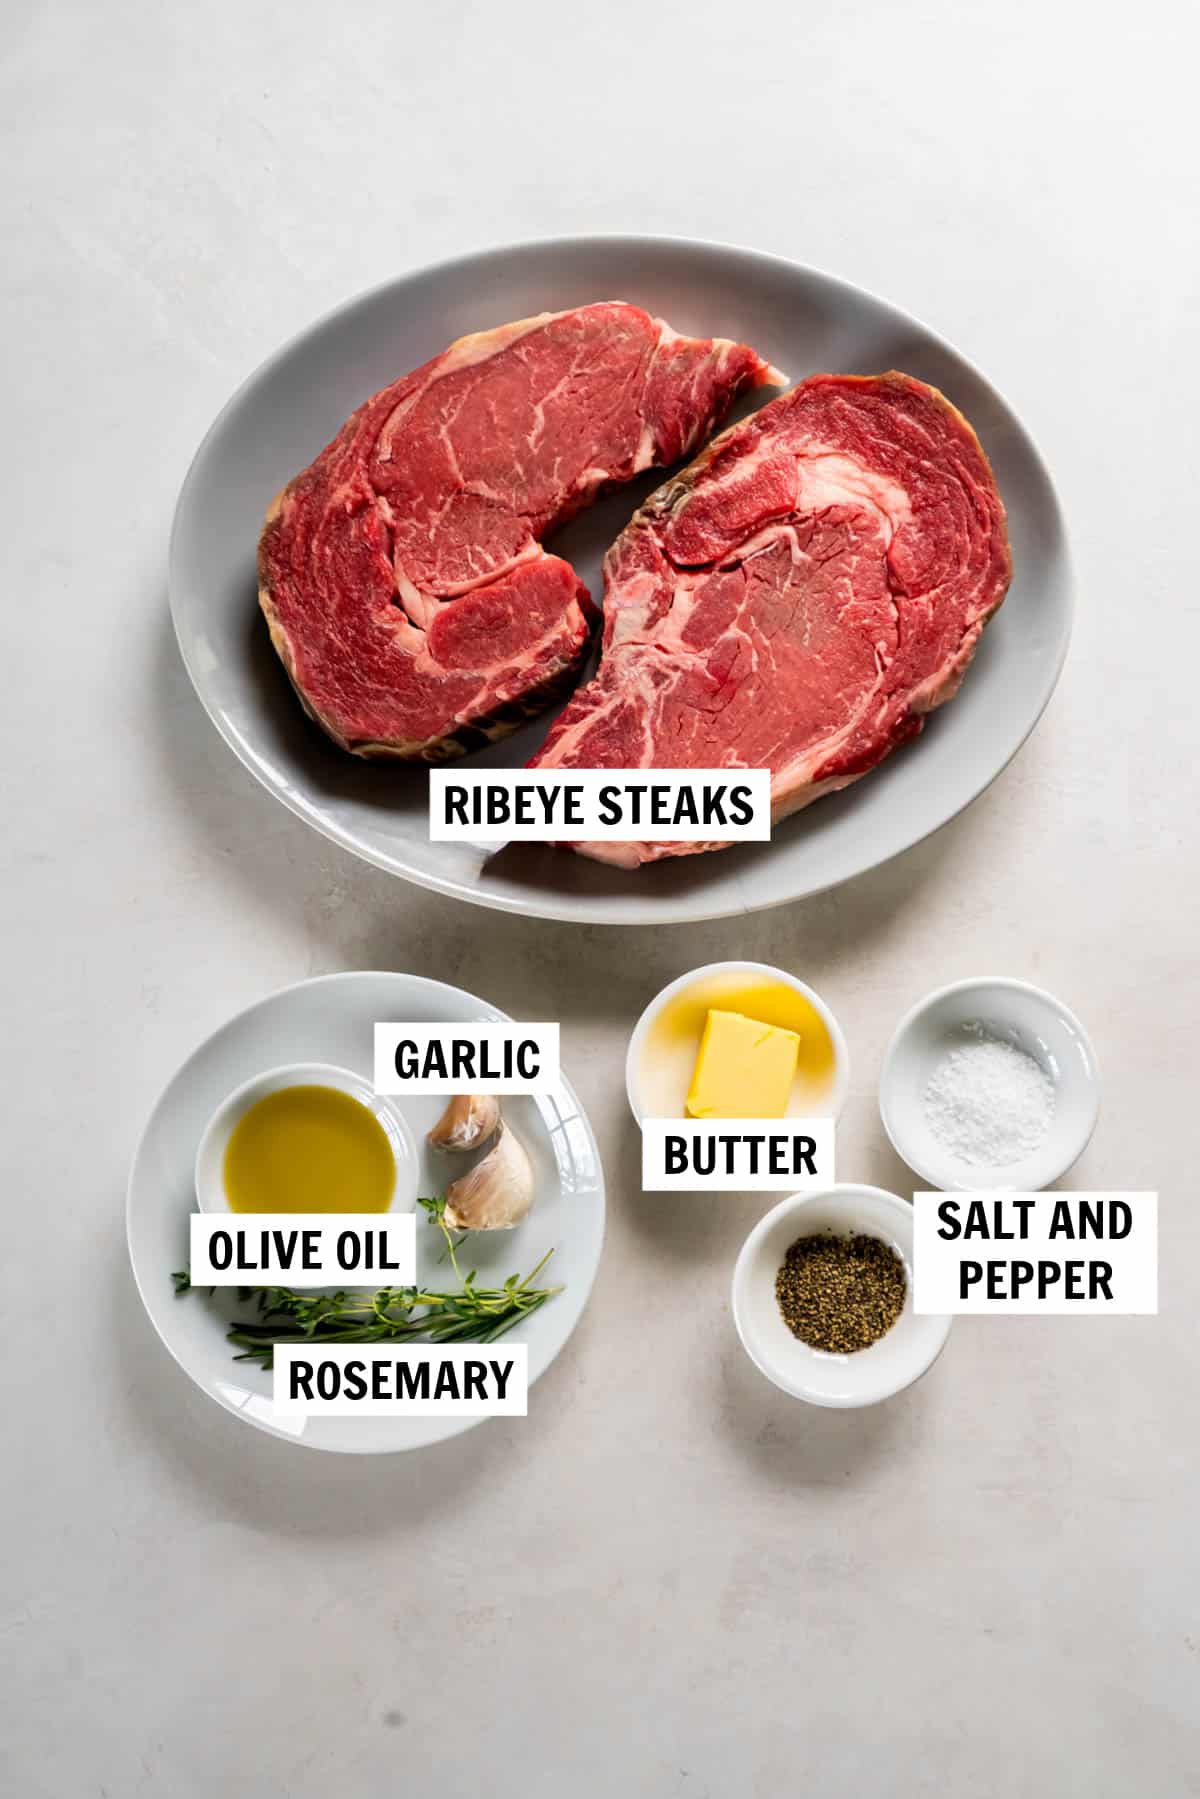 All of the ingredients for pan seared ribeye steaks in bowls on a white countertop.